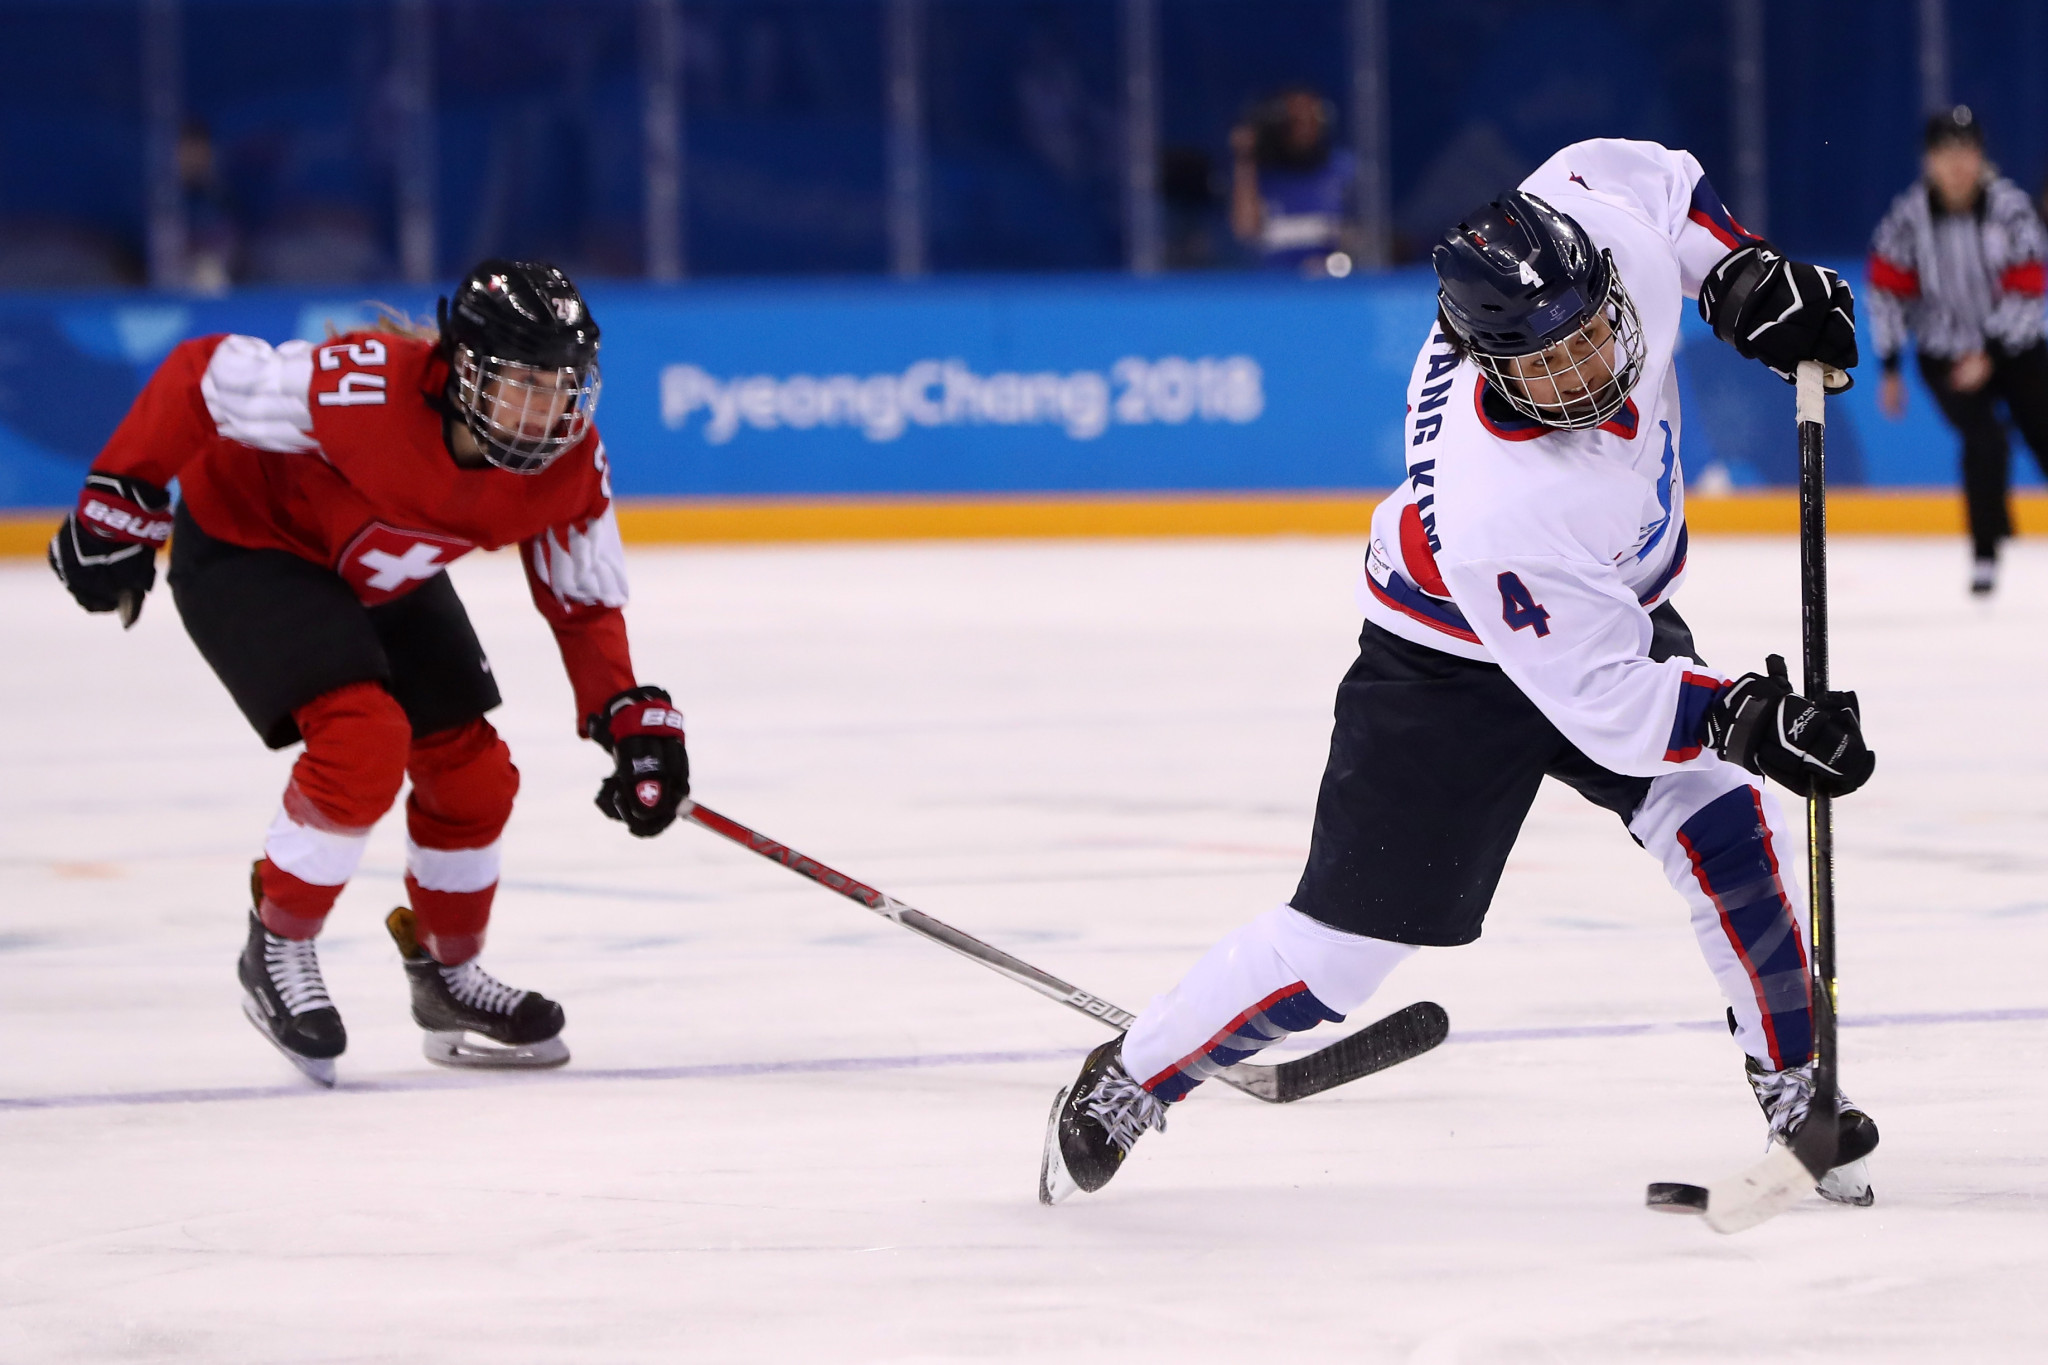 WADA opted not to appeal a decision to clear North Korean ice hockey player Un Hyang Kim of a doping offence ©Getty Images